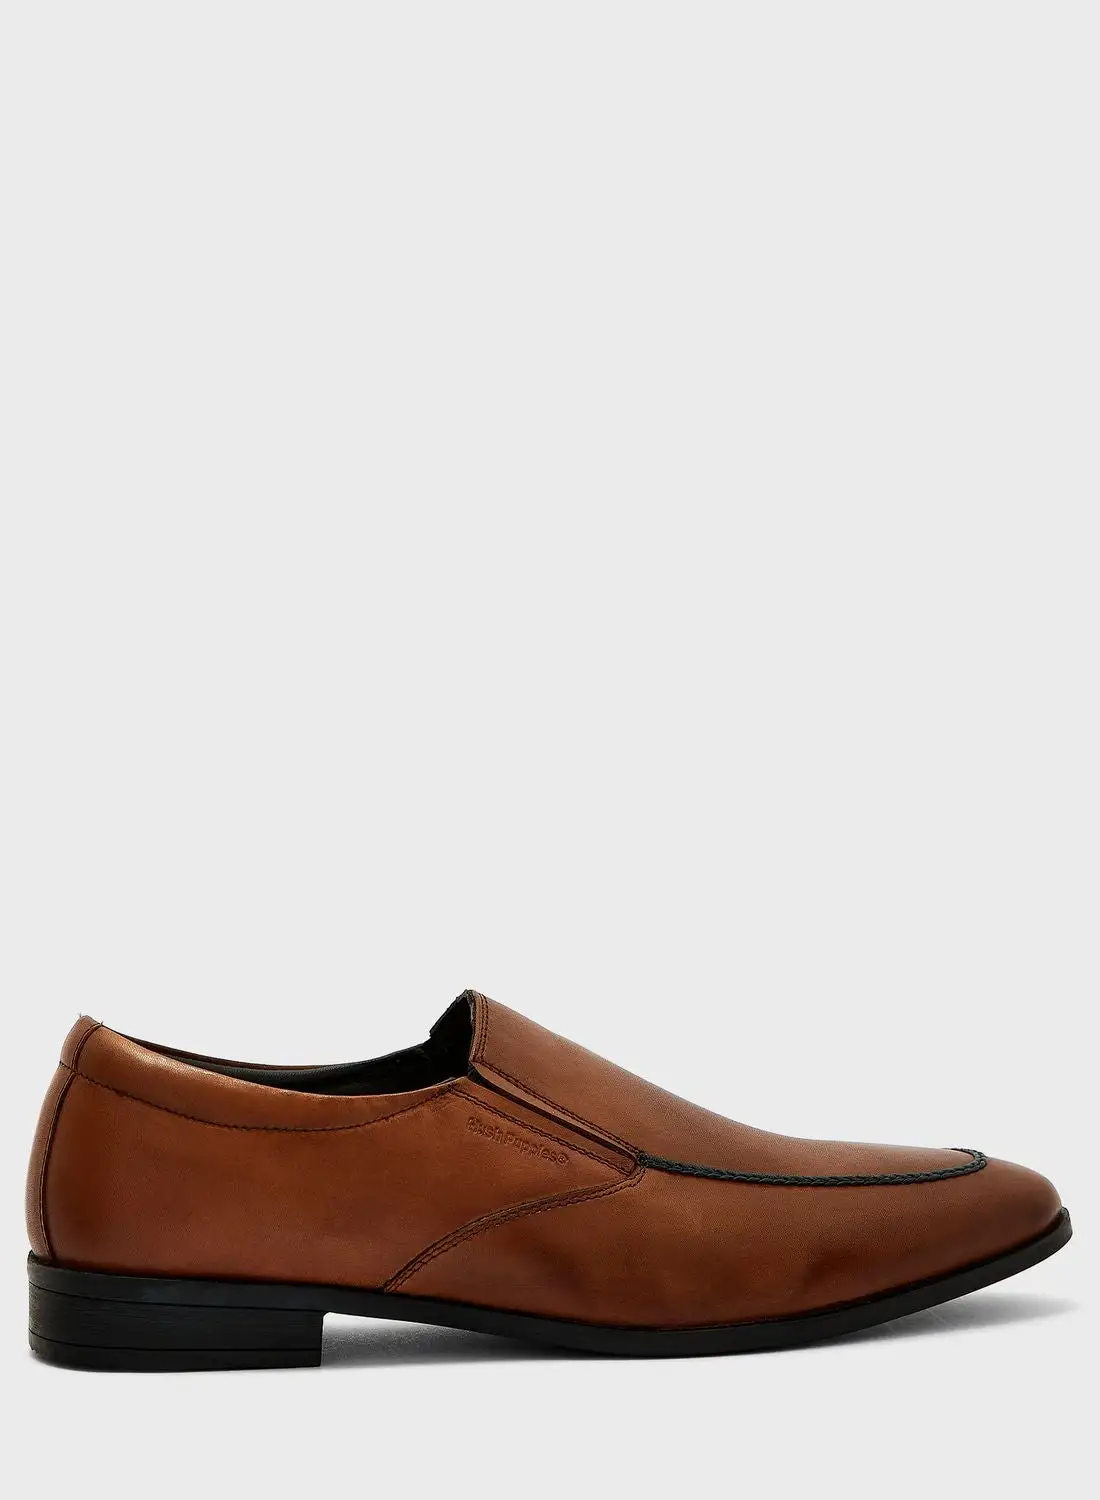 Hush Puppies Casual Slip On Loafers